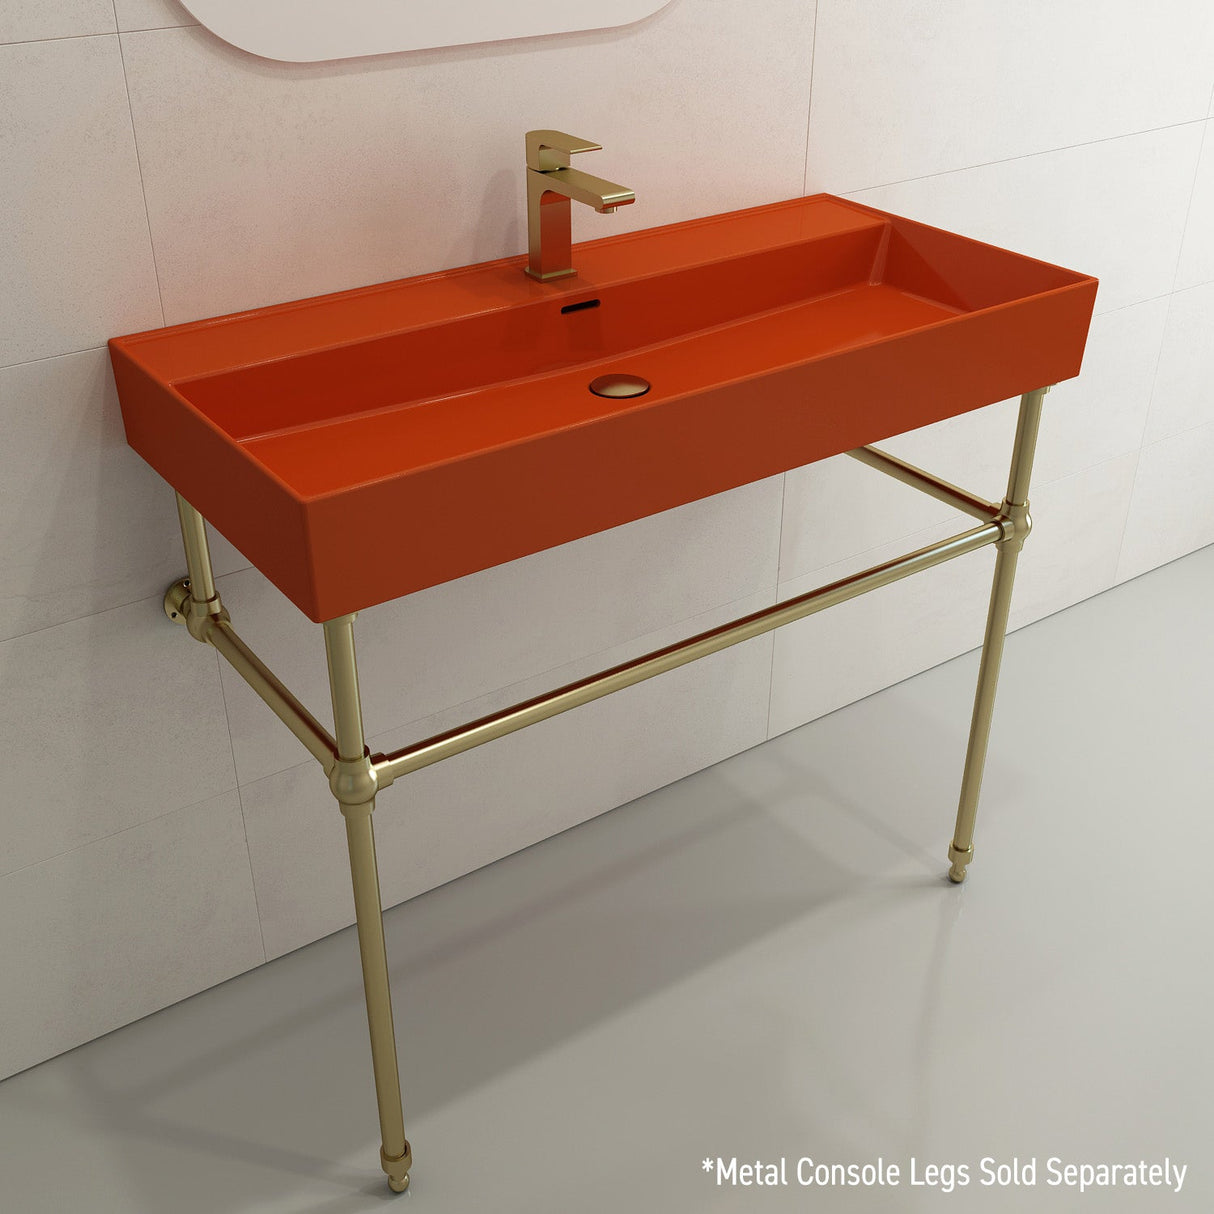 BOCCHI 1378-012-0126 Milano Wall-Mounted Sink Fireclay 39.75 in. 1-Hole with Overflow in Orange